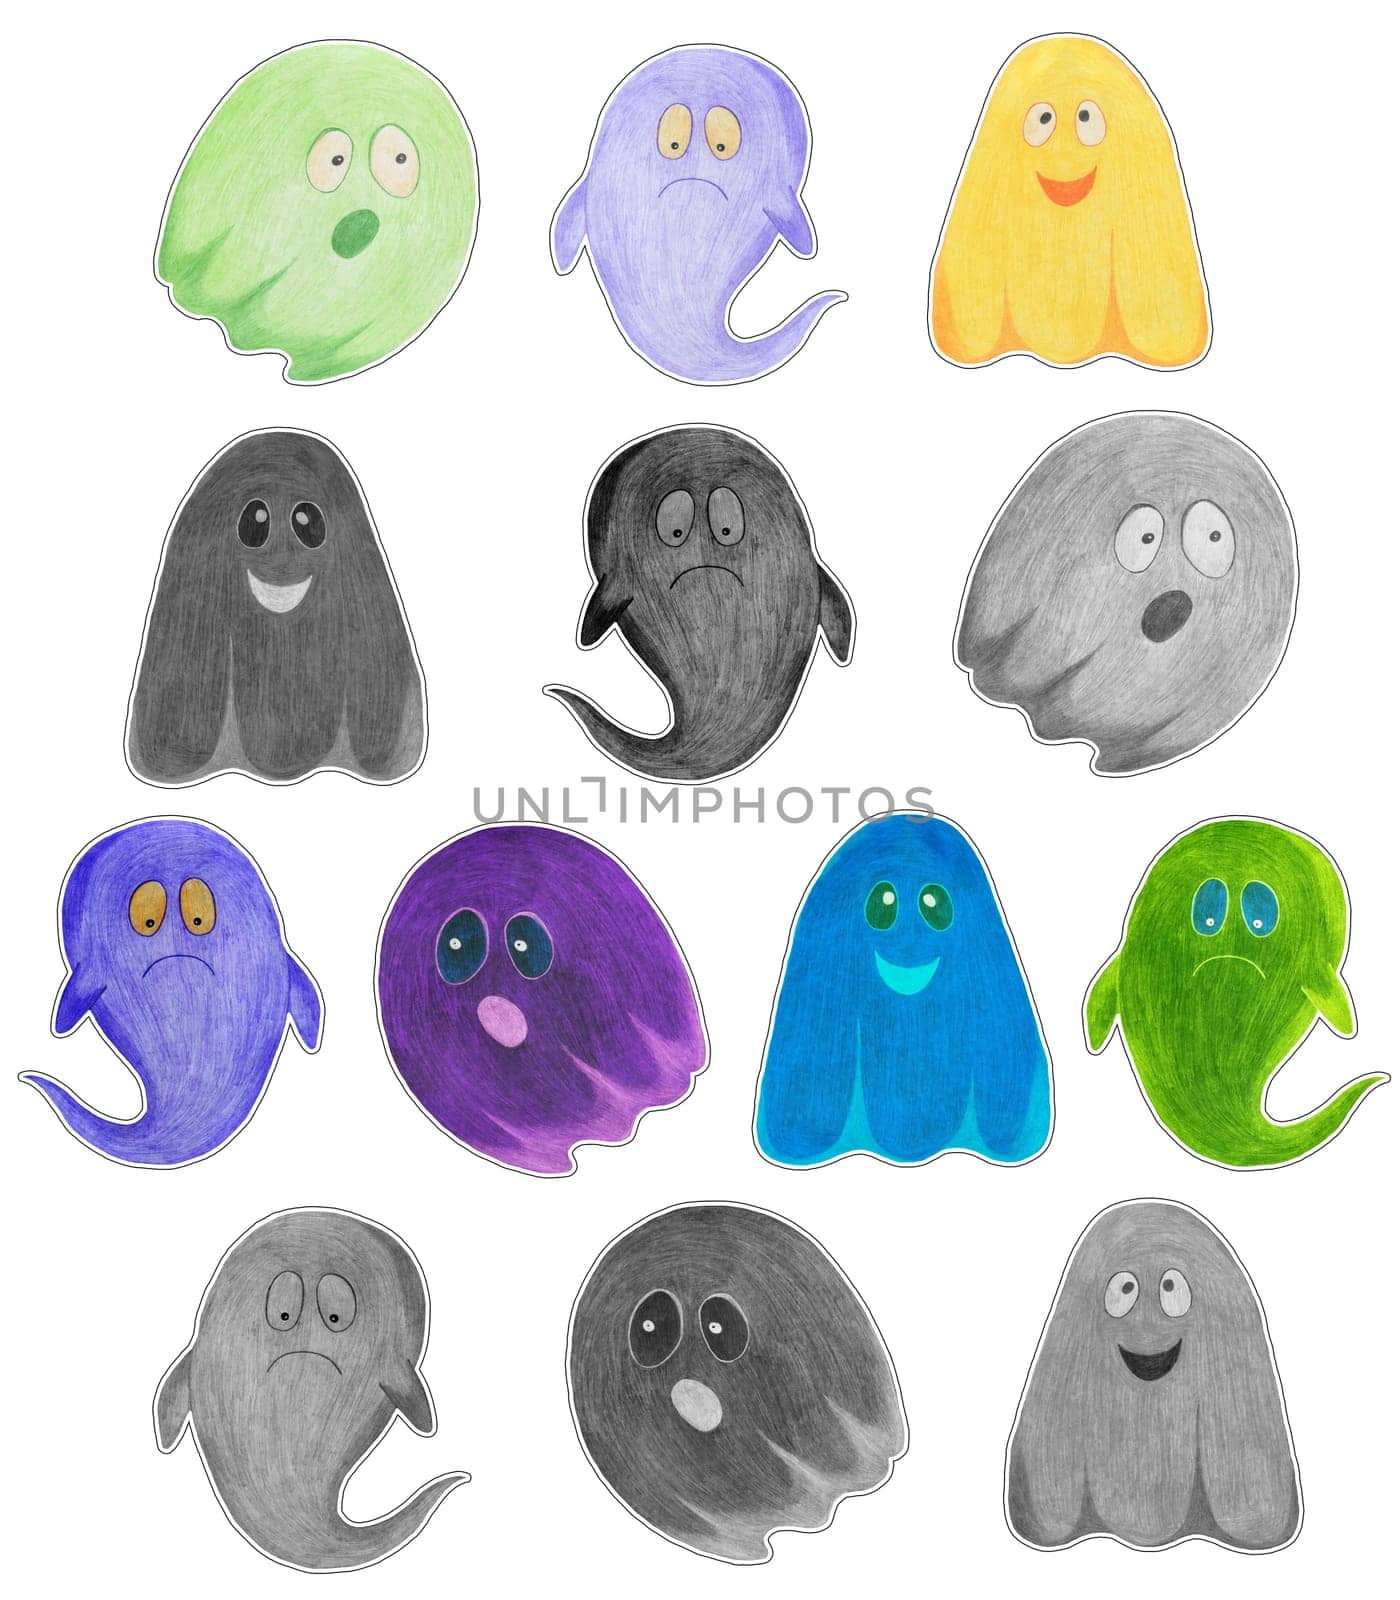 Set of Hand Drawn Halloween Ghosts Sticker Pack. Halloween scary ghostly monsters. Cute cartoon spooky character, Drawn by Color Pencils.